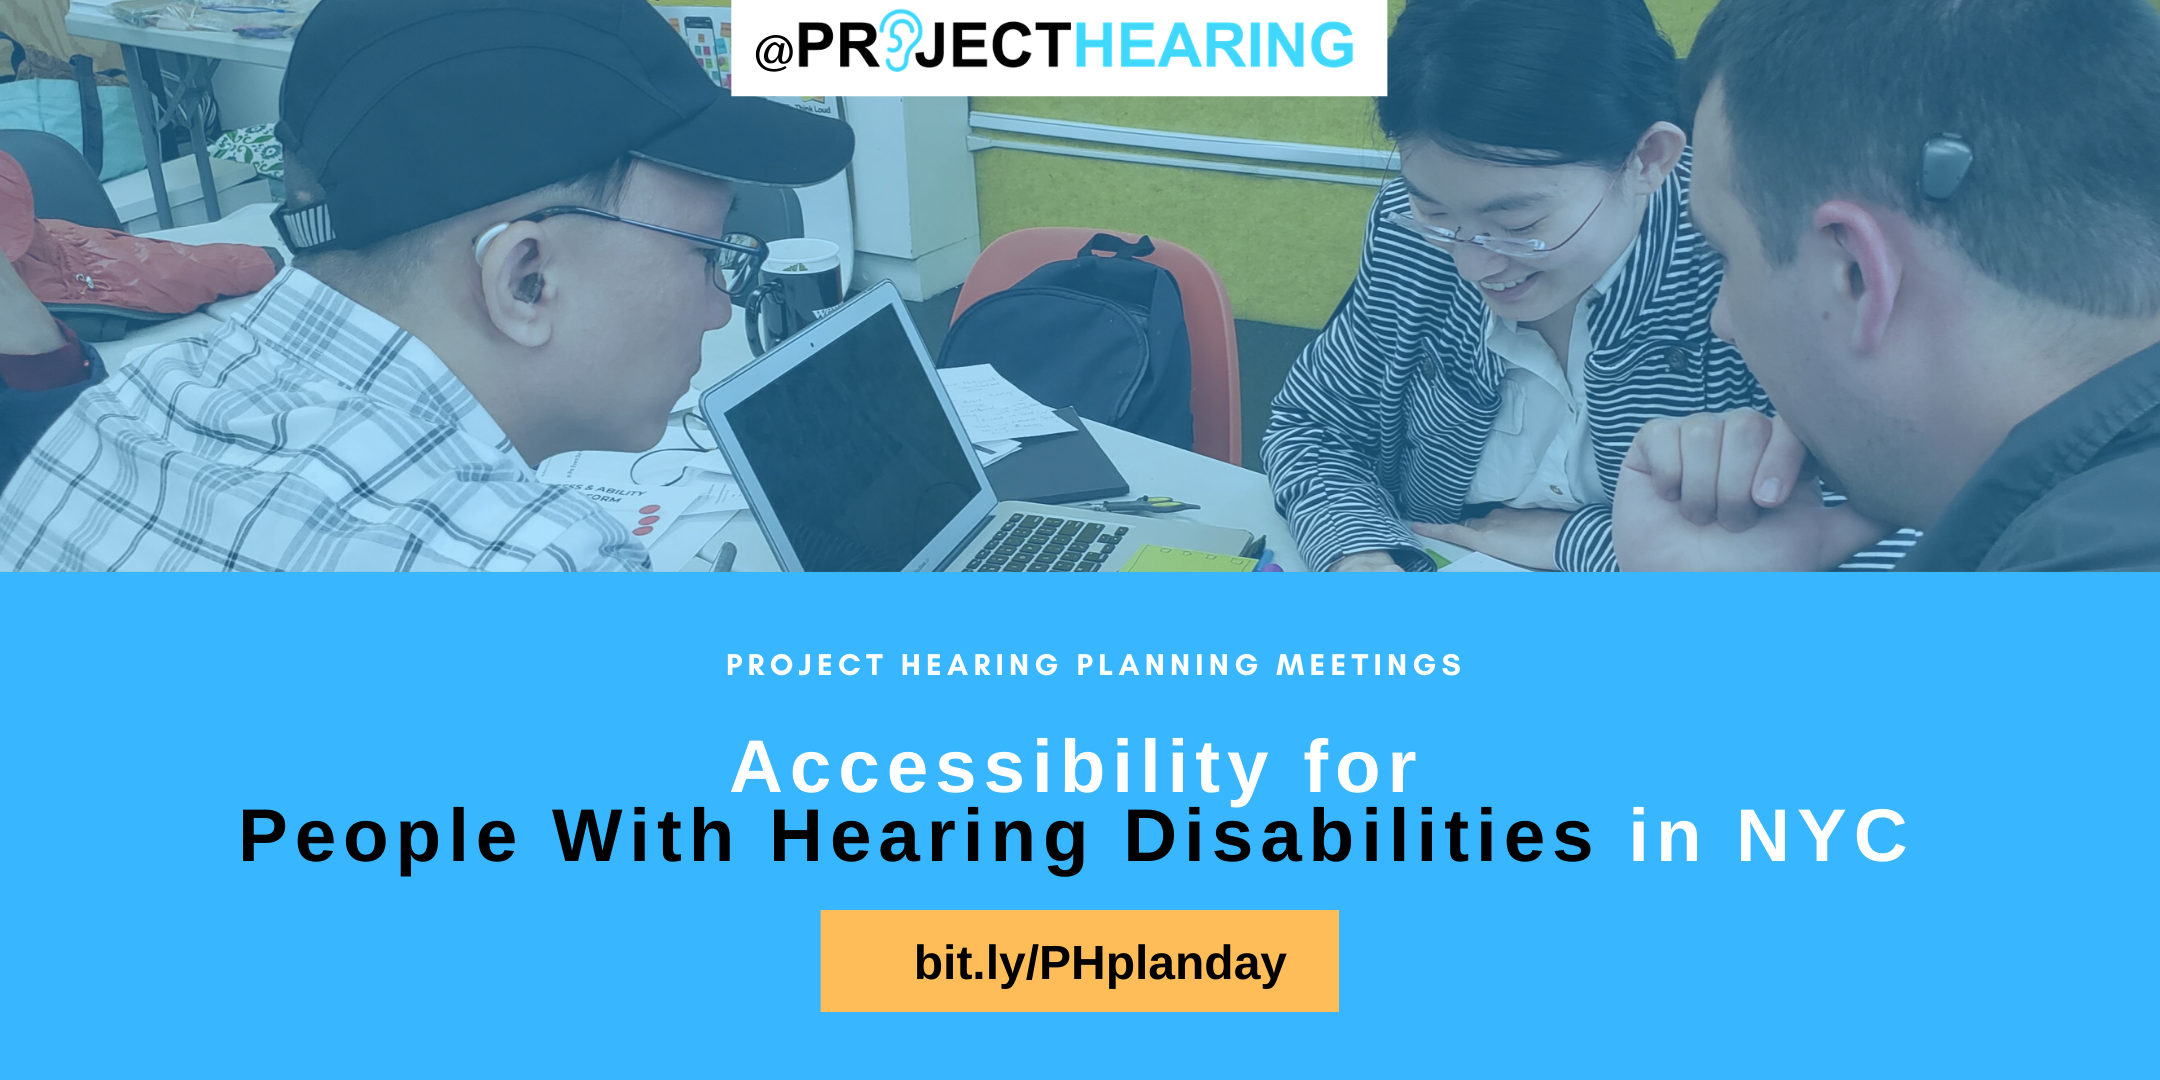 Planning Meeting | Events + workshops for people with hearing disabilities.